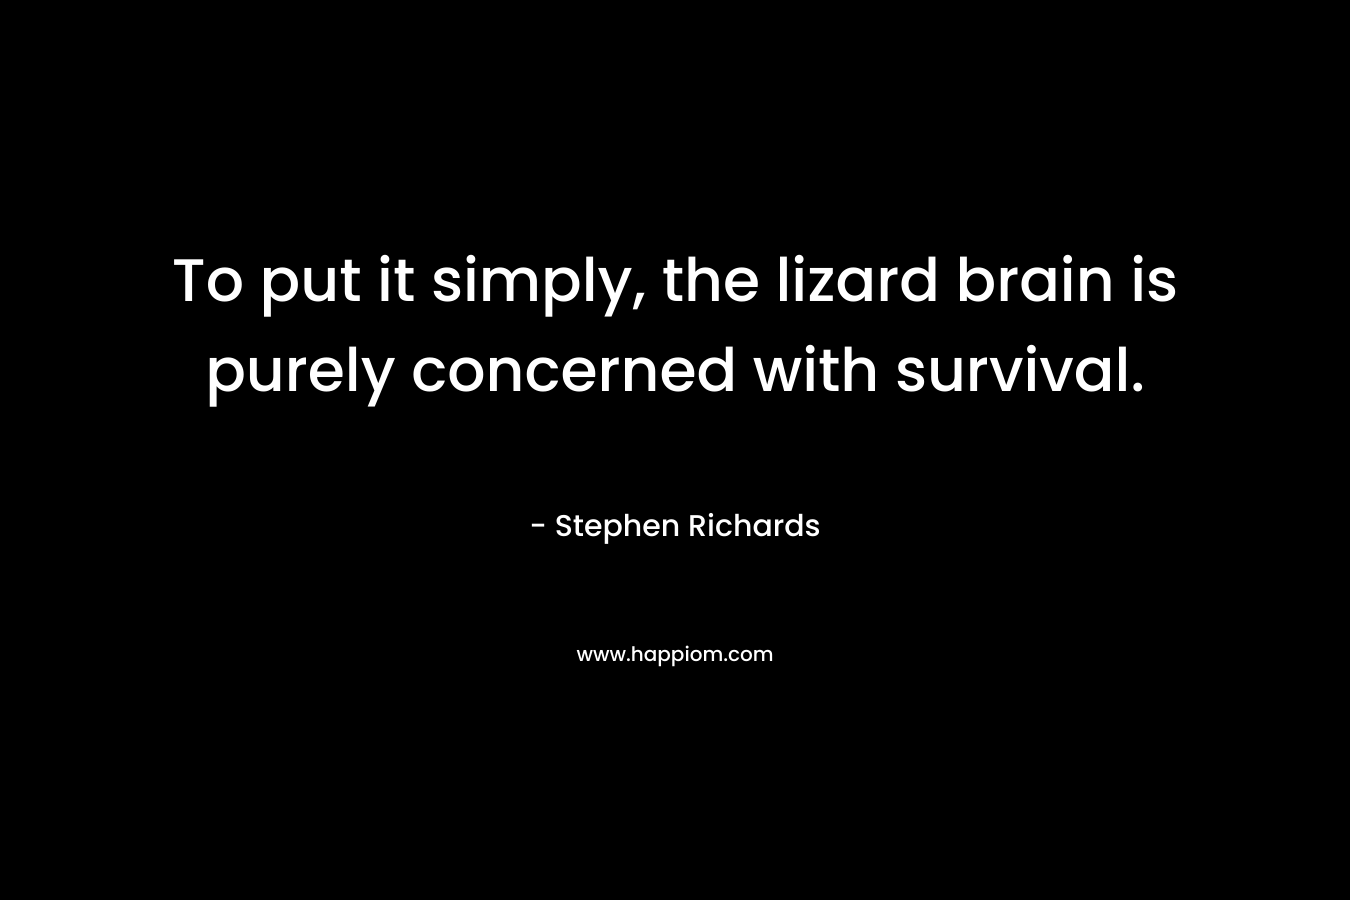 To put it simply, the lizard brain is purely concerned with survival. – Stephen Richards